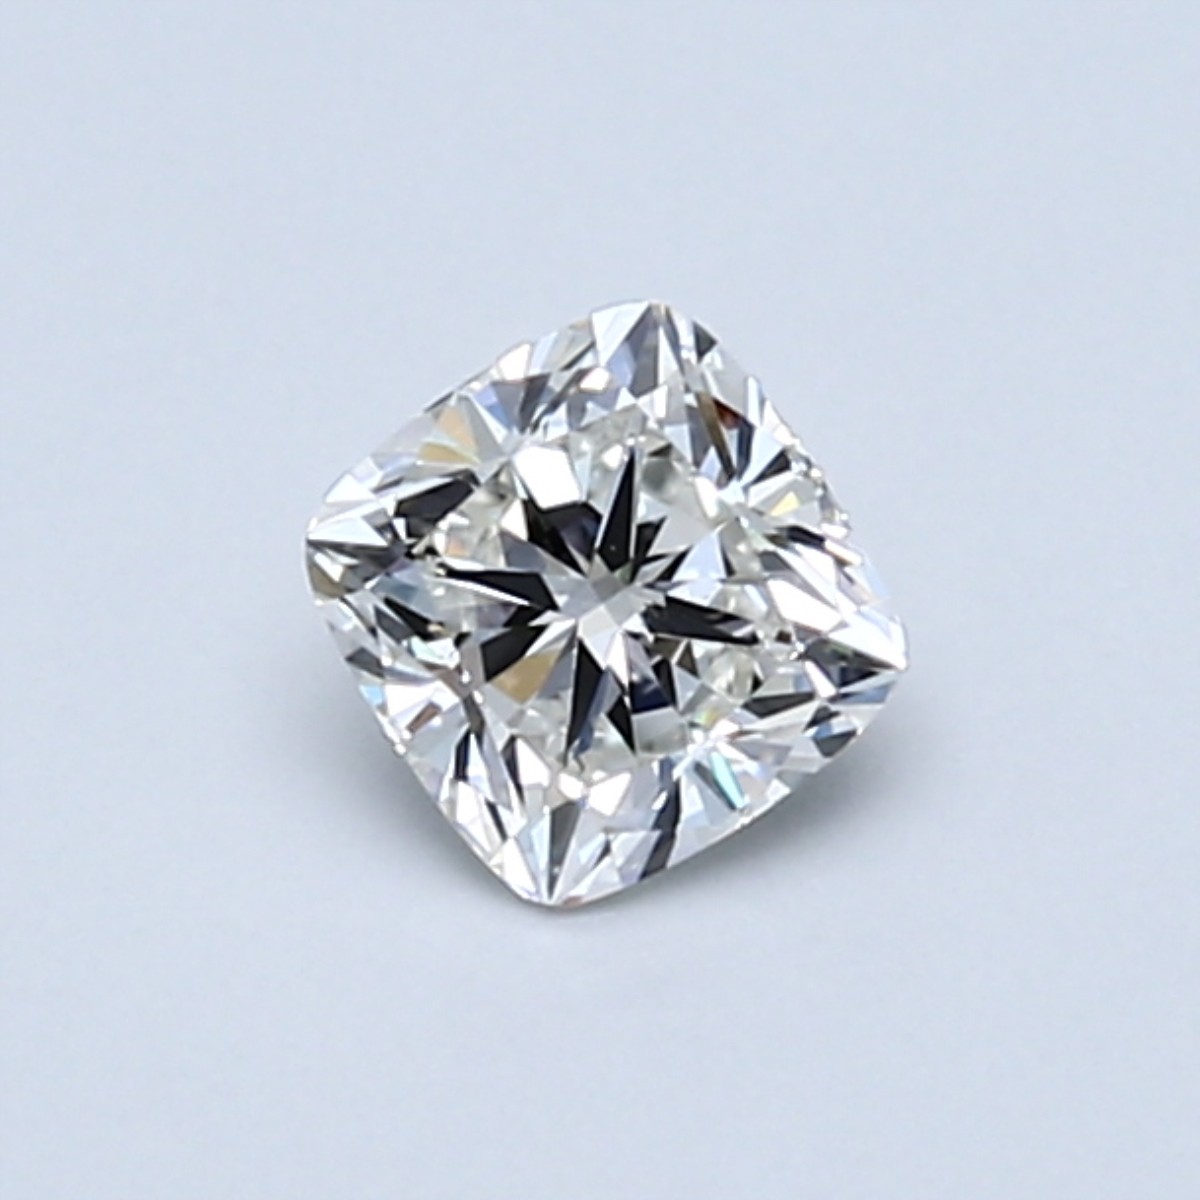 Cushion 0.5 Carat H Color VS2 Clarity For Sale